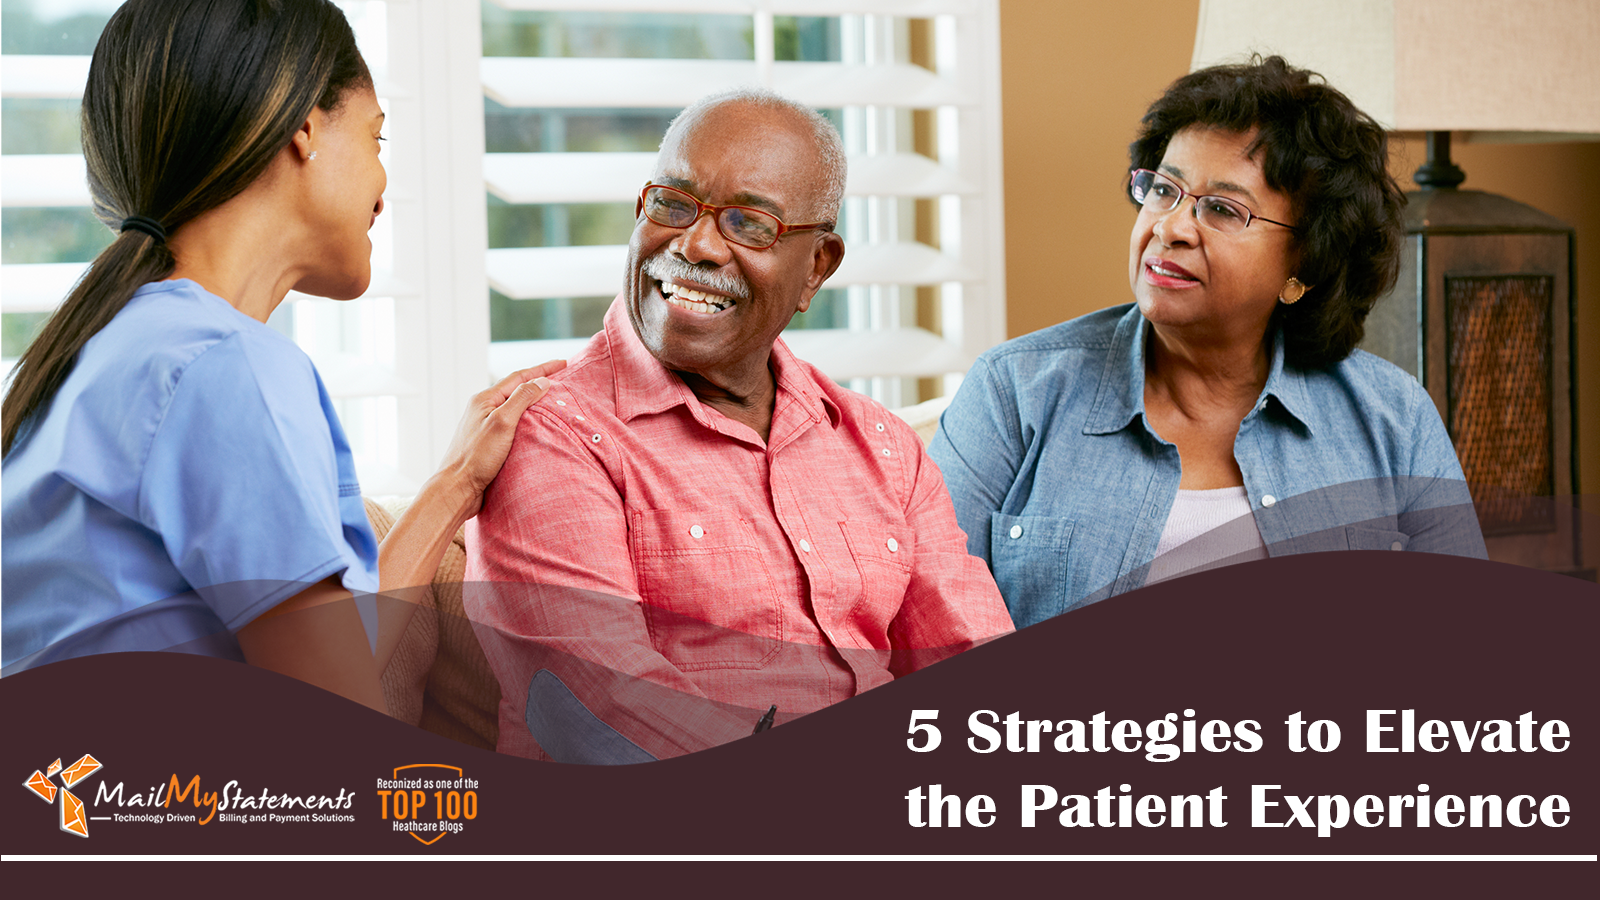 5 Strategies to Elevate the Patient Experience